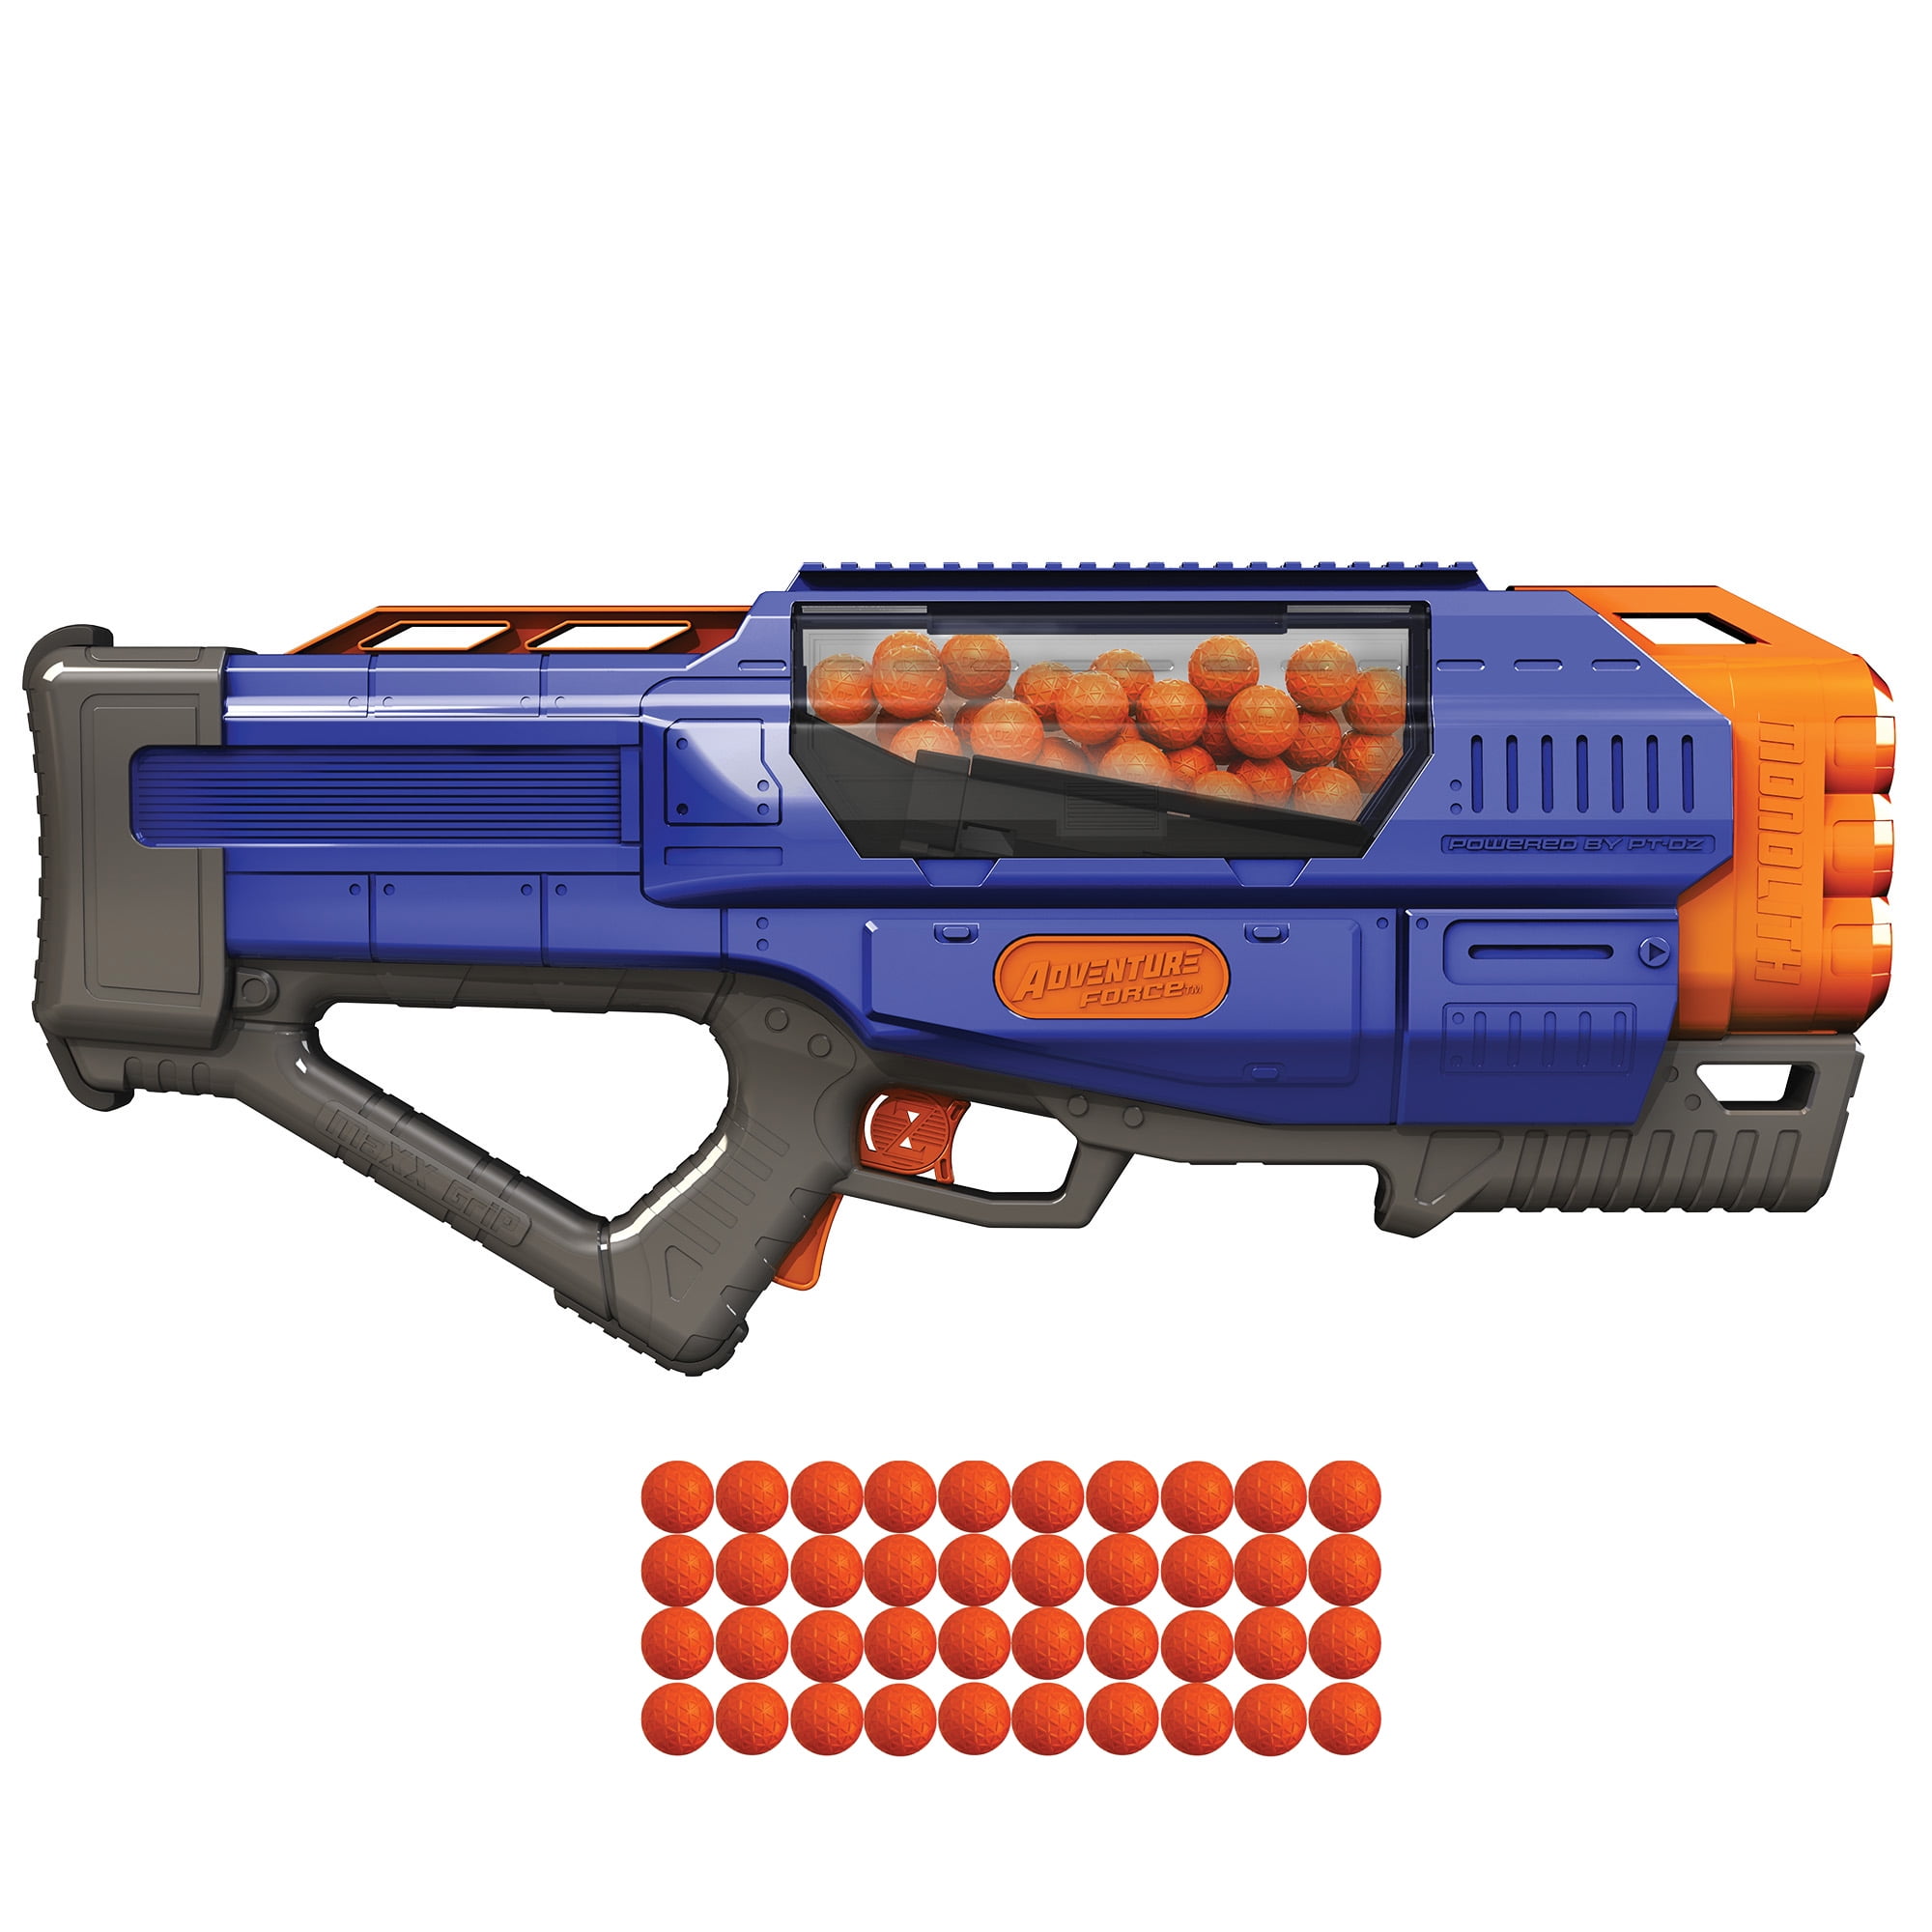 Adventure Force Tactical Strike Monolith Automatic Ball Blaster with 40 Rounds - Compatible with NERF RIVAL NERF Hyper Rounds - Walmart.com